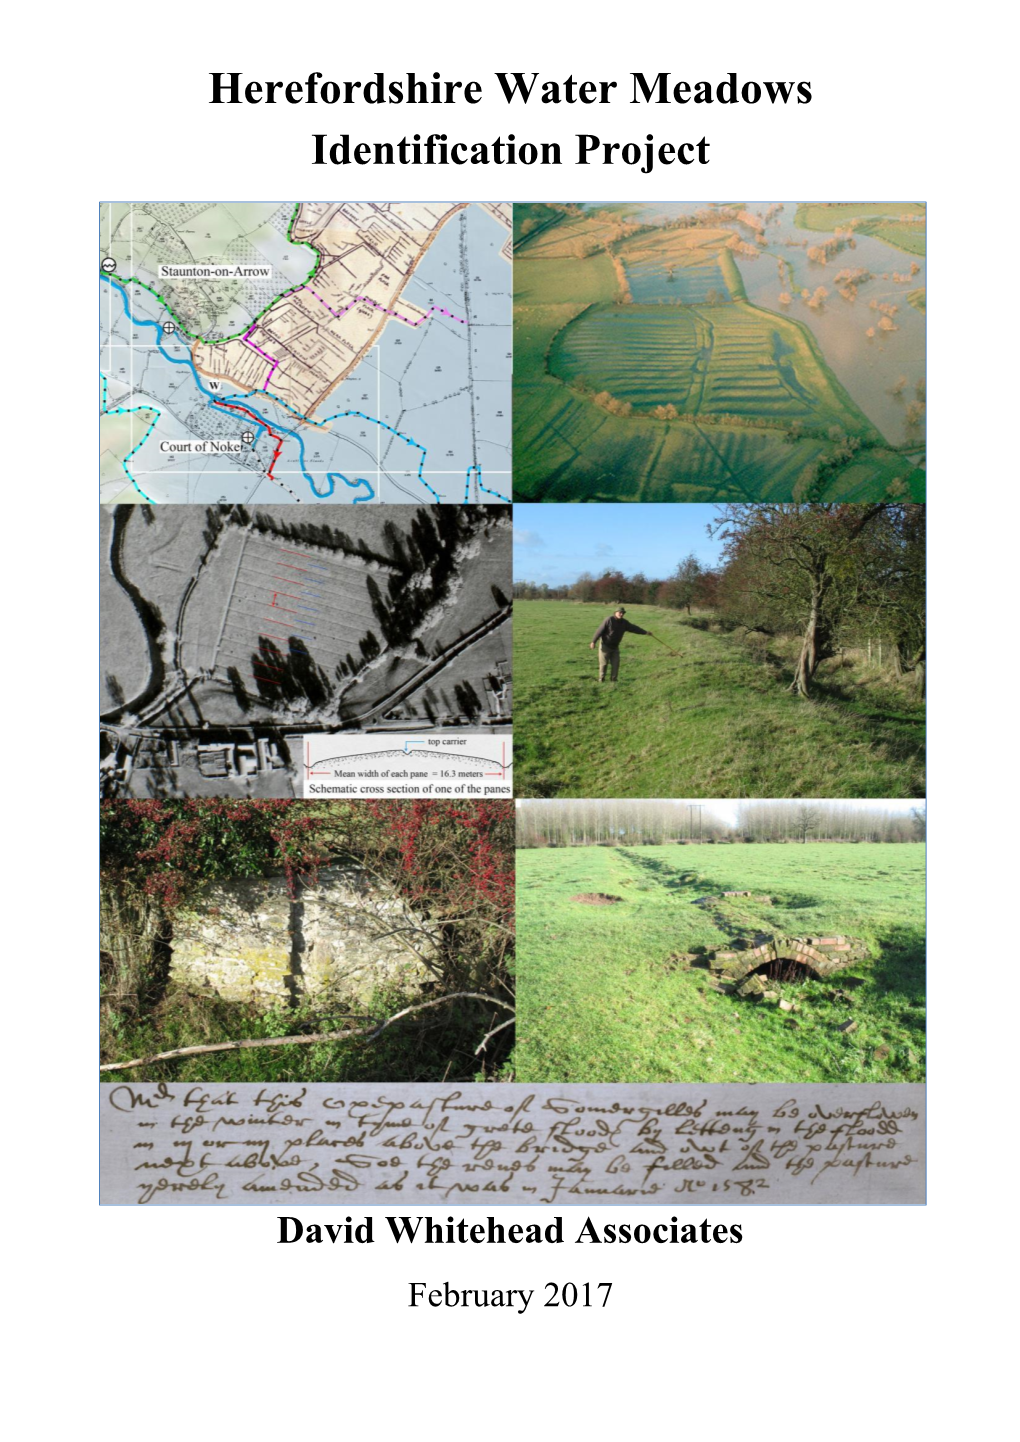 Herefordshire Water Meadows Identification Project